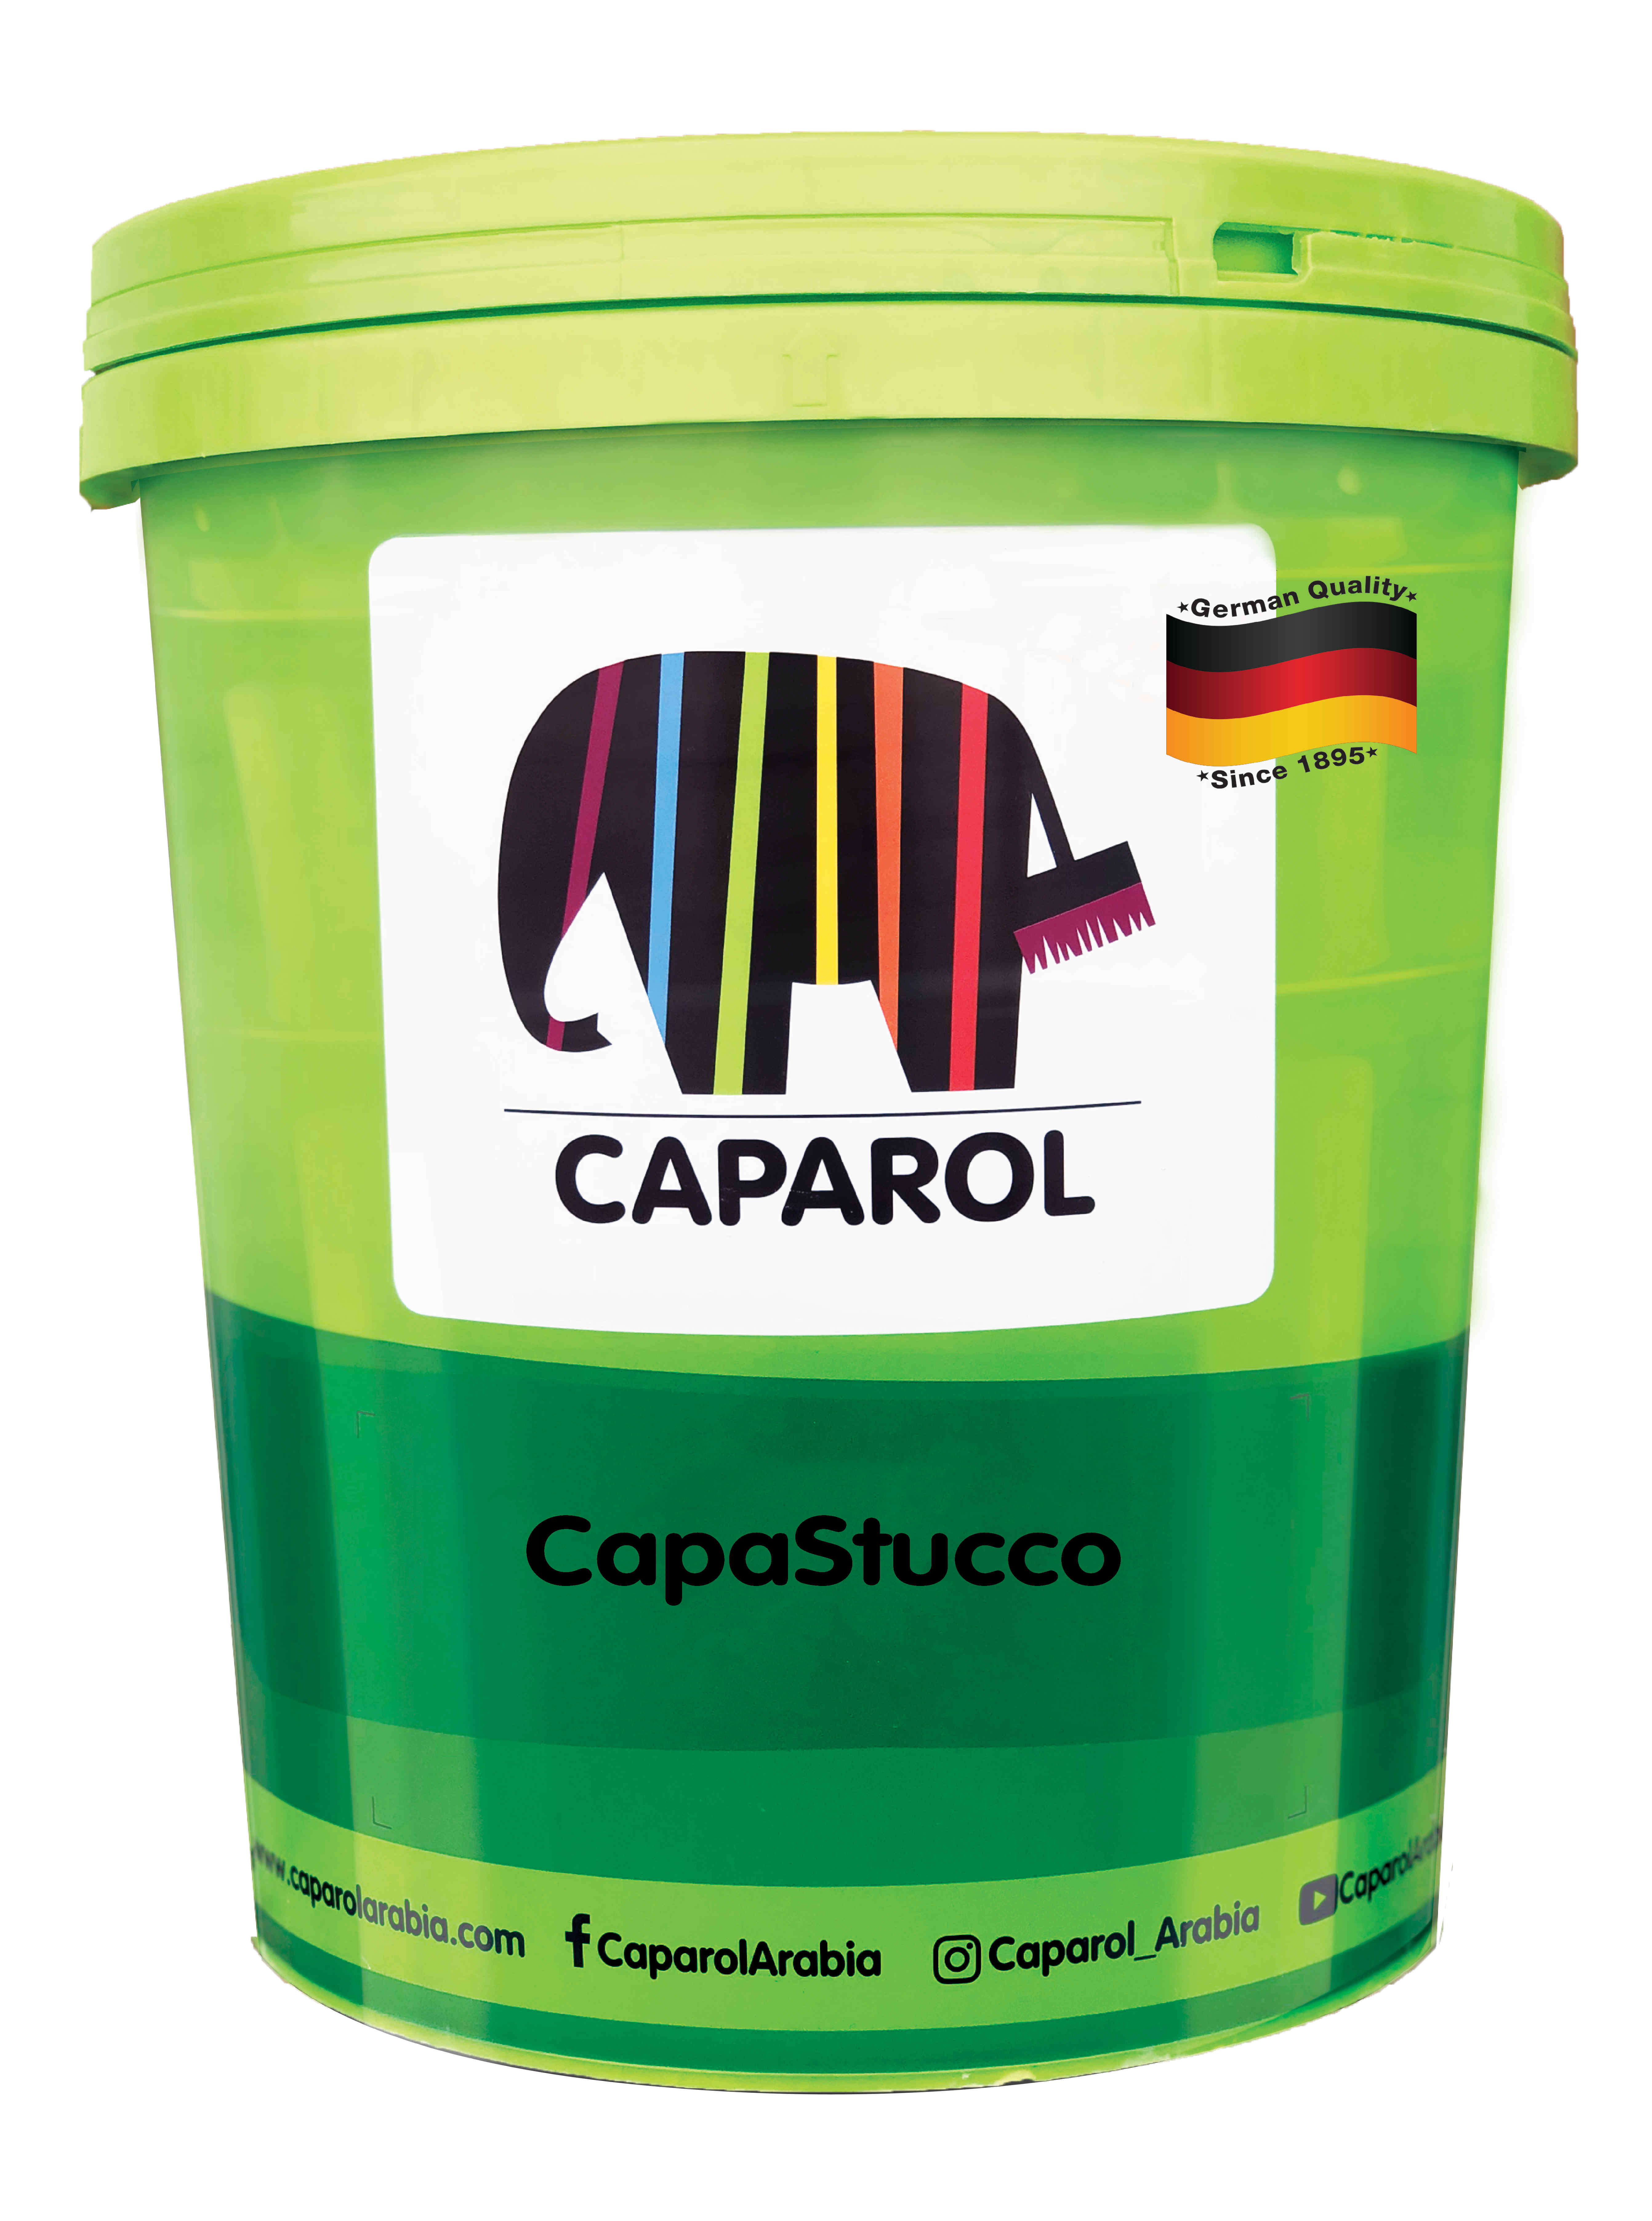 CapaStucco - Ready-Mix Acrylic Co-Polymer Economical Filler/Putty For Walls And Ceilings For Interiors